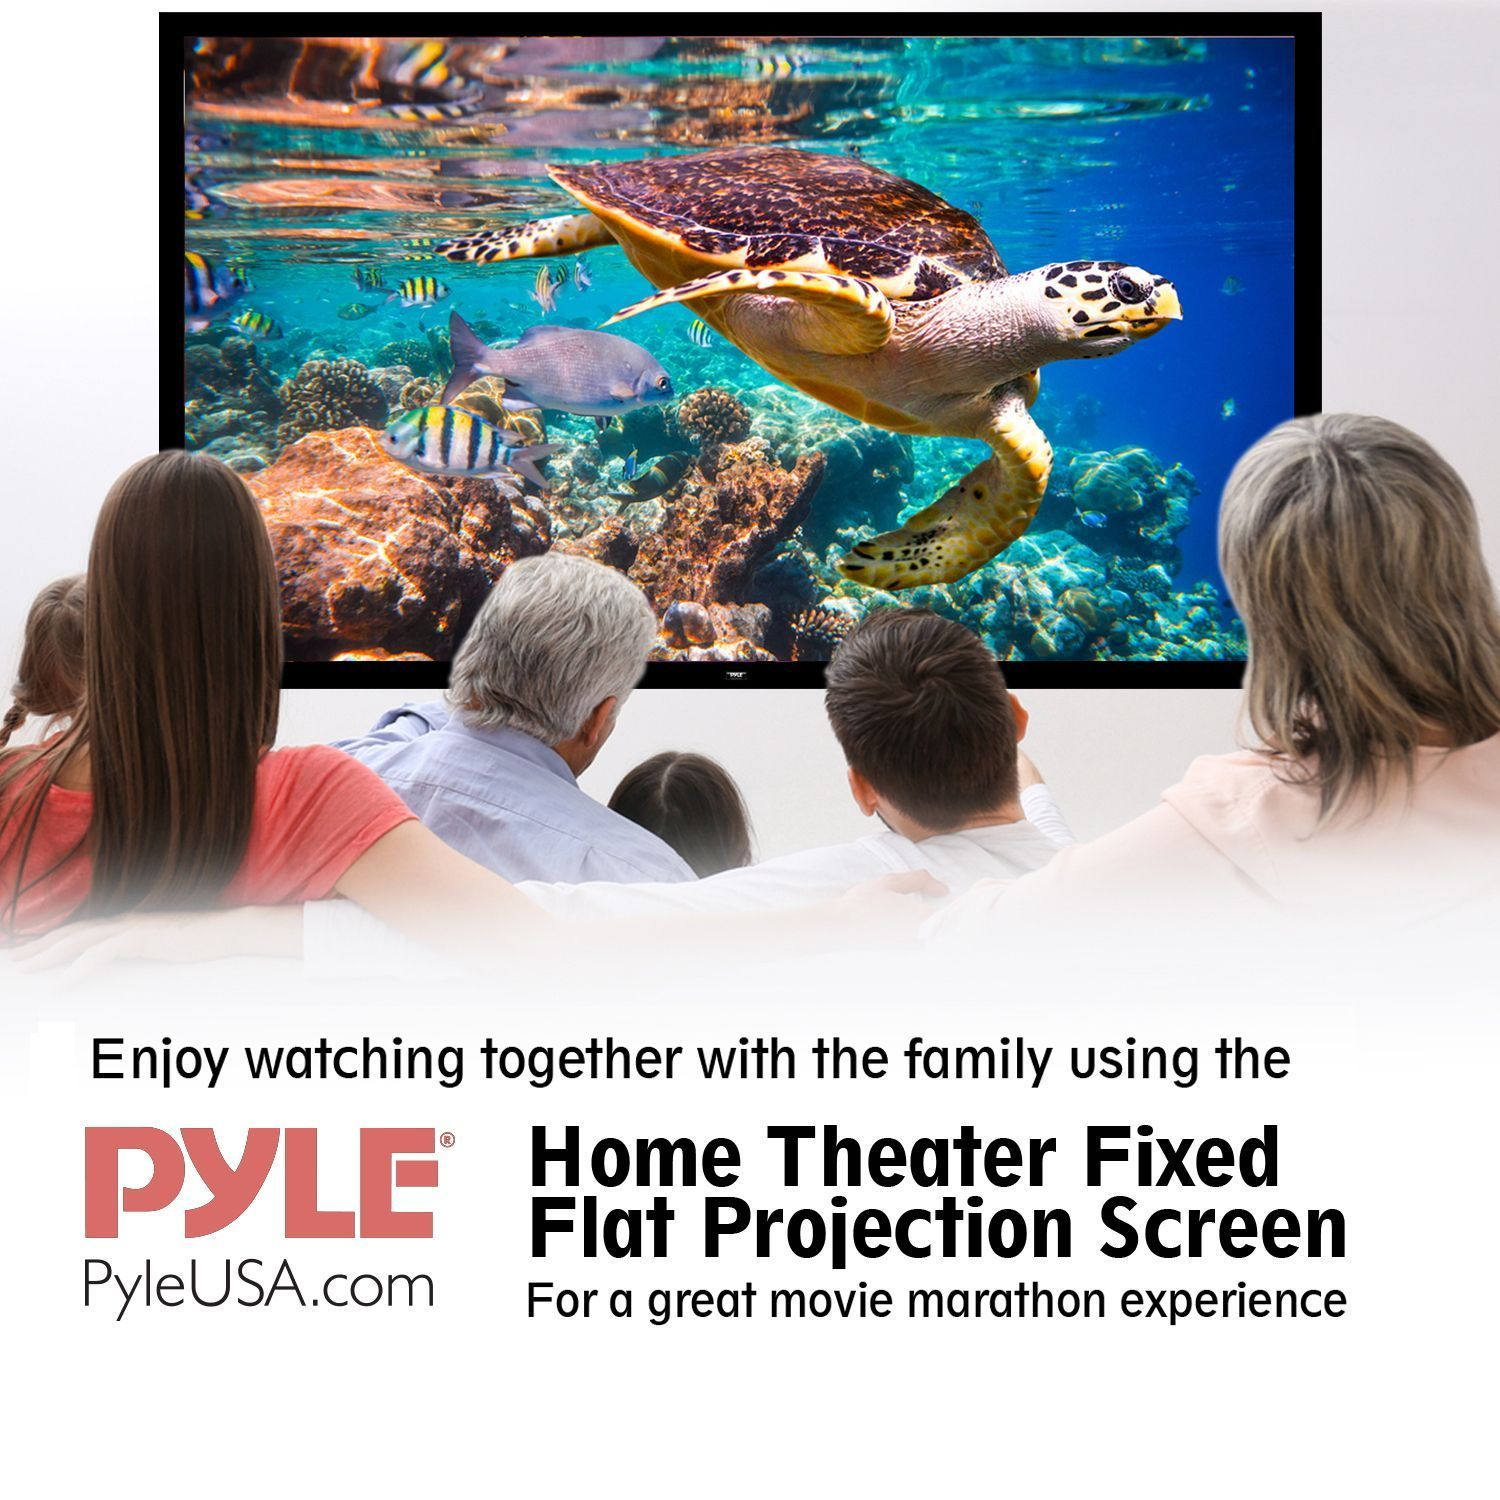 Pyle 120" Matt White Home Theater TV Wall Mounted Fixed Flat Projector Screen - 120 inch 16:9 Full HD Projection - Easy to Set Up for Room Video, Slideshow, Movie / Film Showing - PRJTPFL122